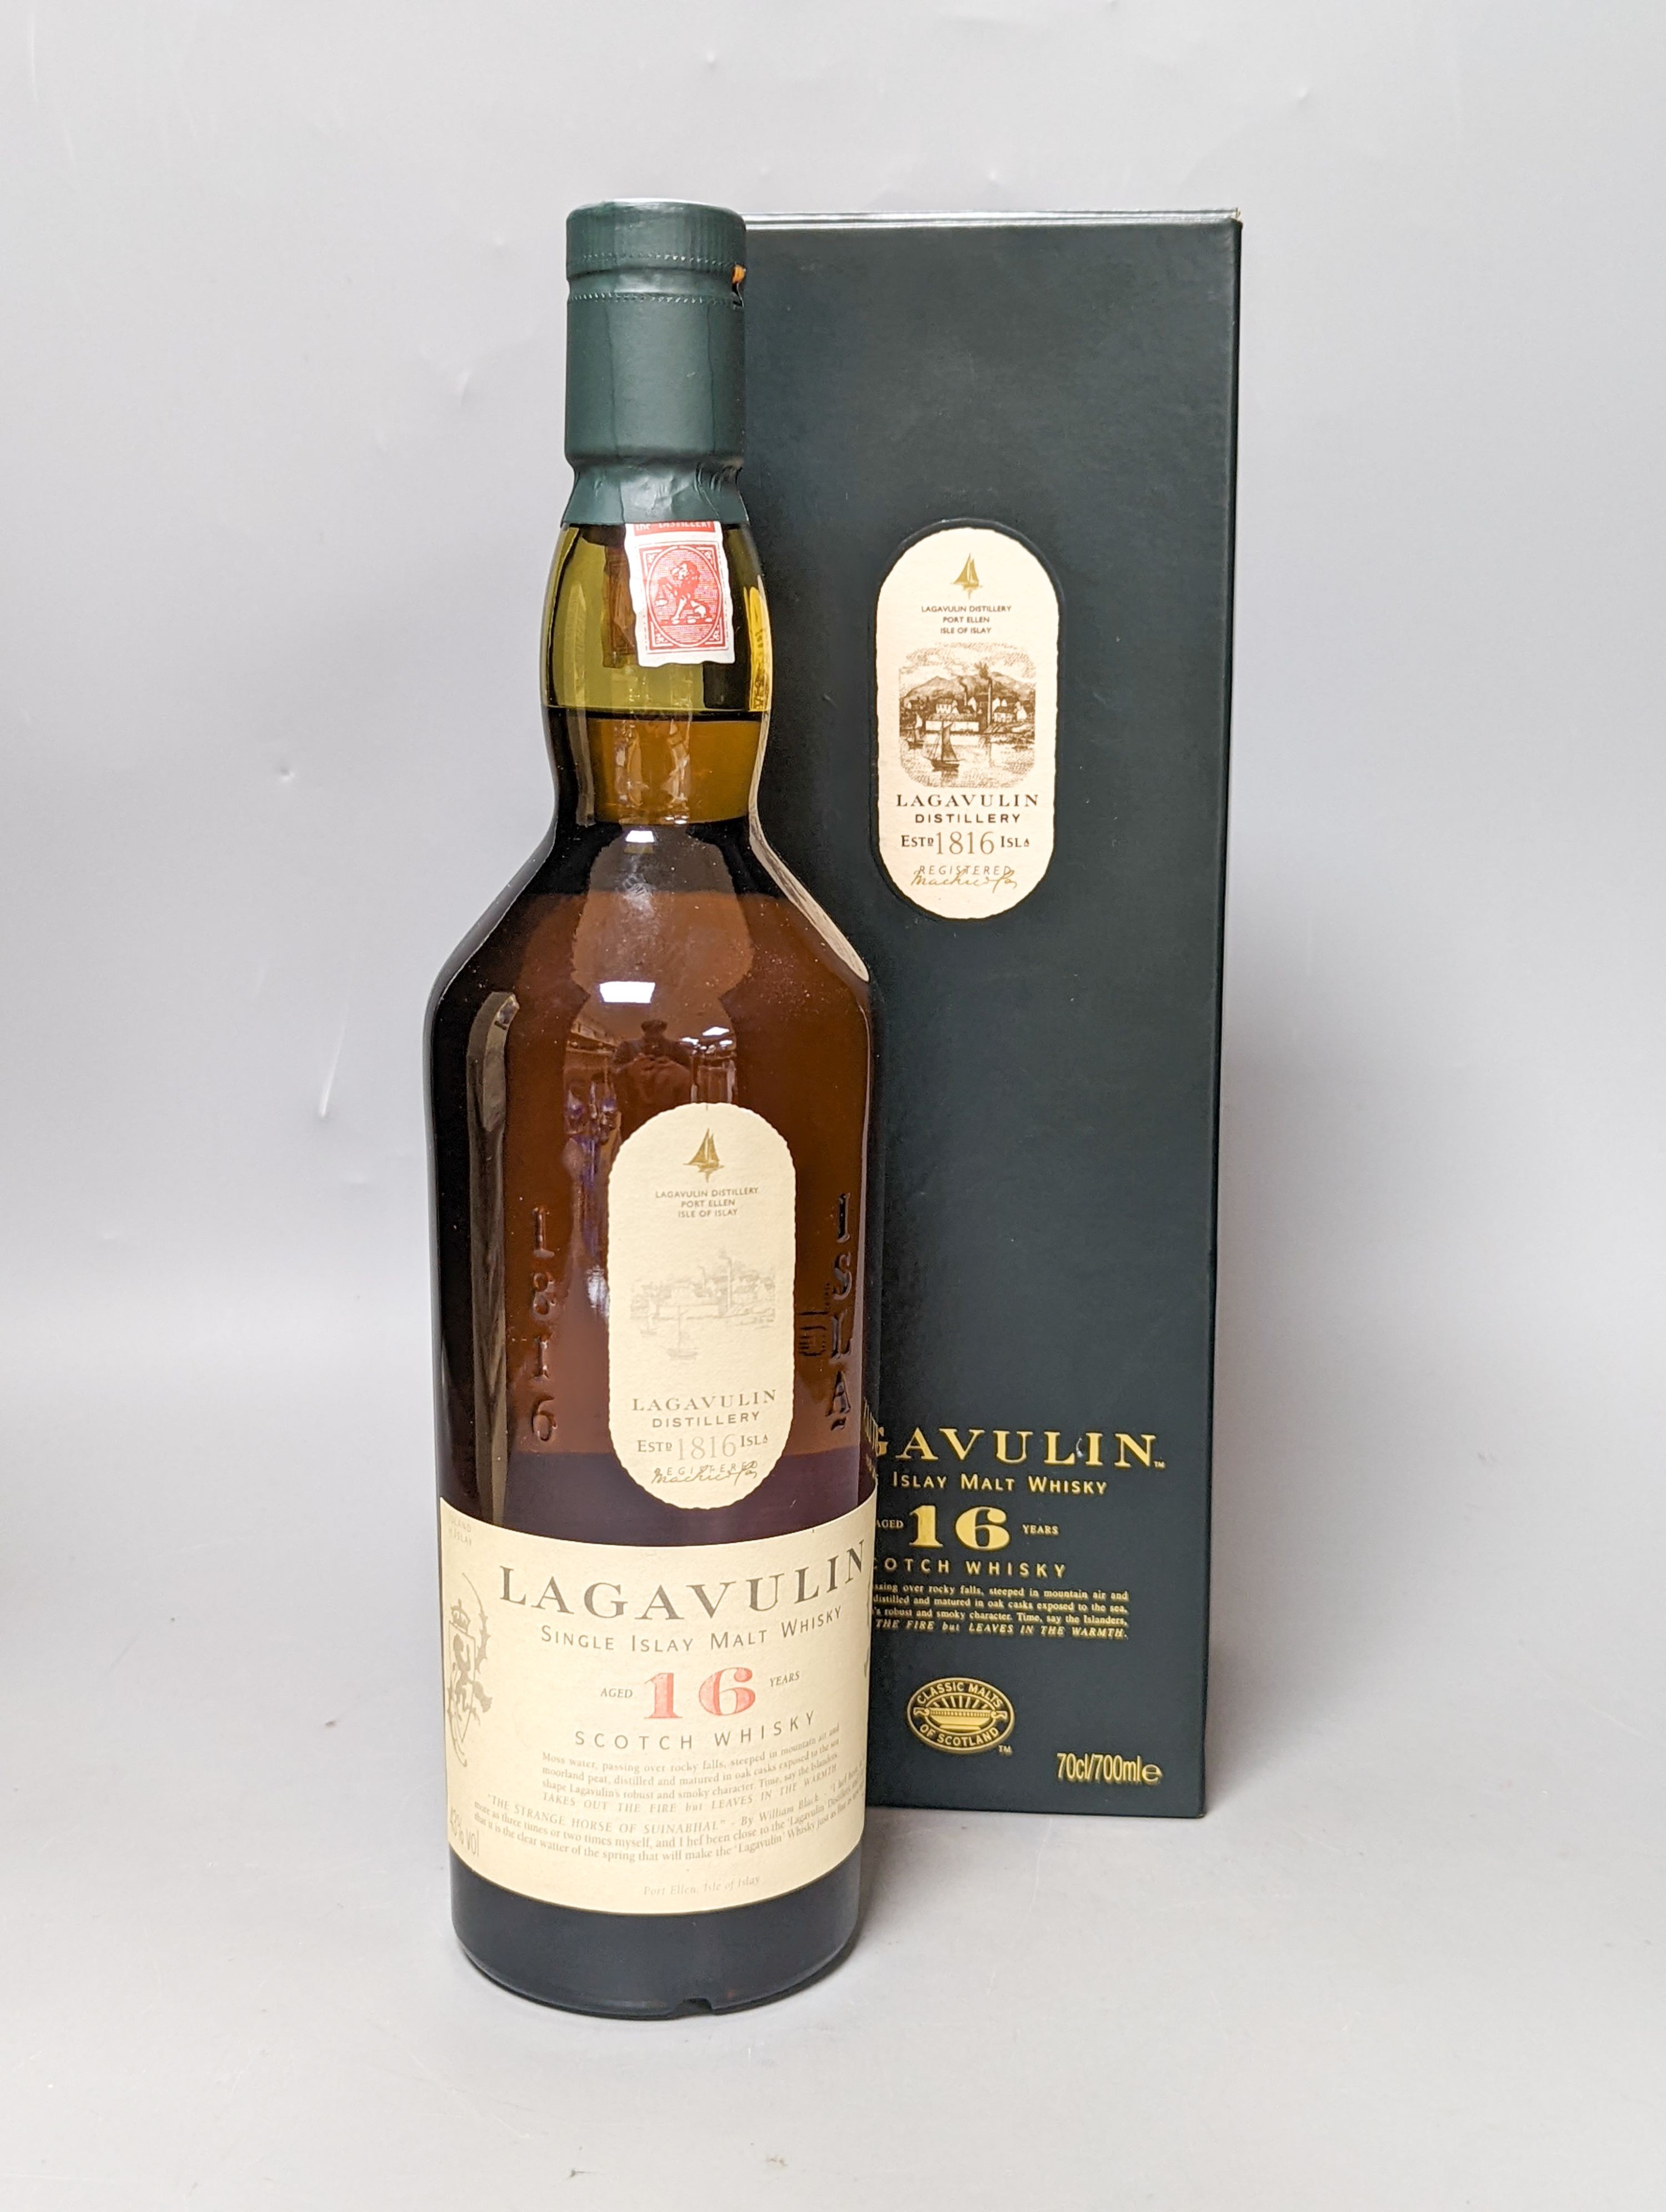 Four assorted bottles of whisky including Lagavulin 16 year old single malt, Royal Lochnagar 12 year old single malt, Tamnavulin single malt aged 12 years and The Antiquery aged 12 years, all boxed.